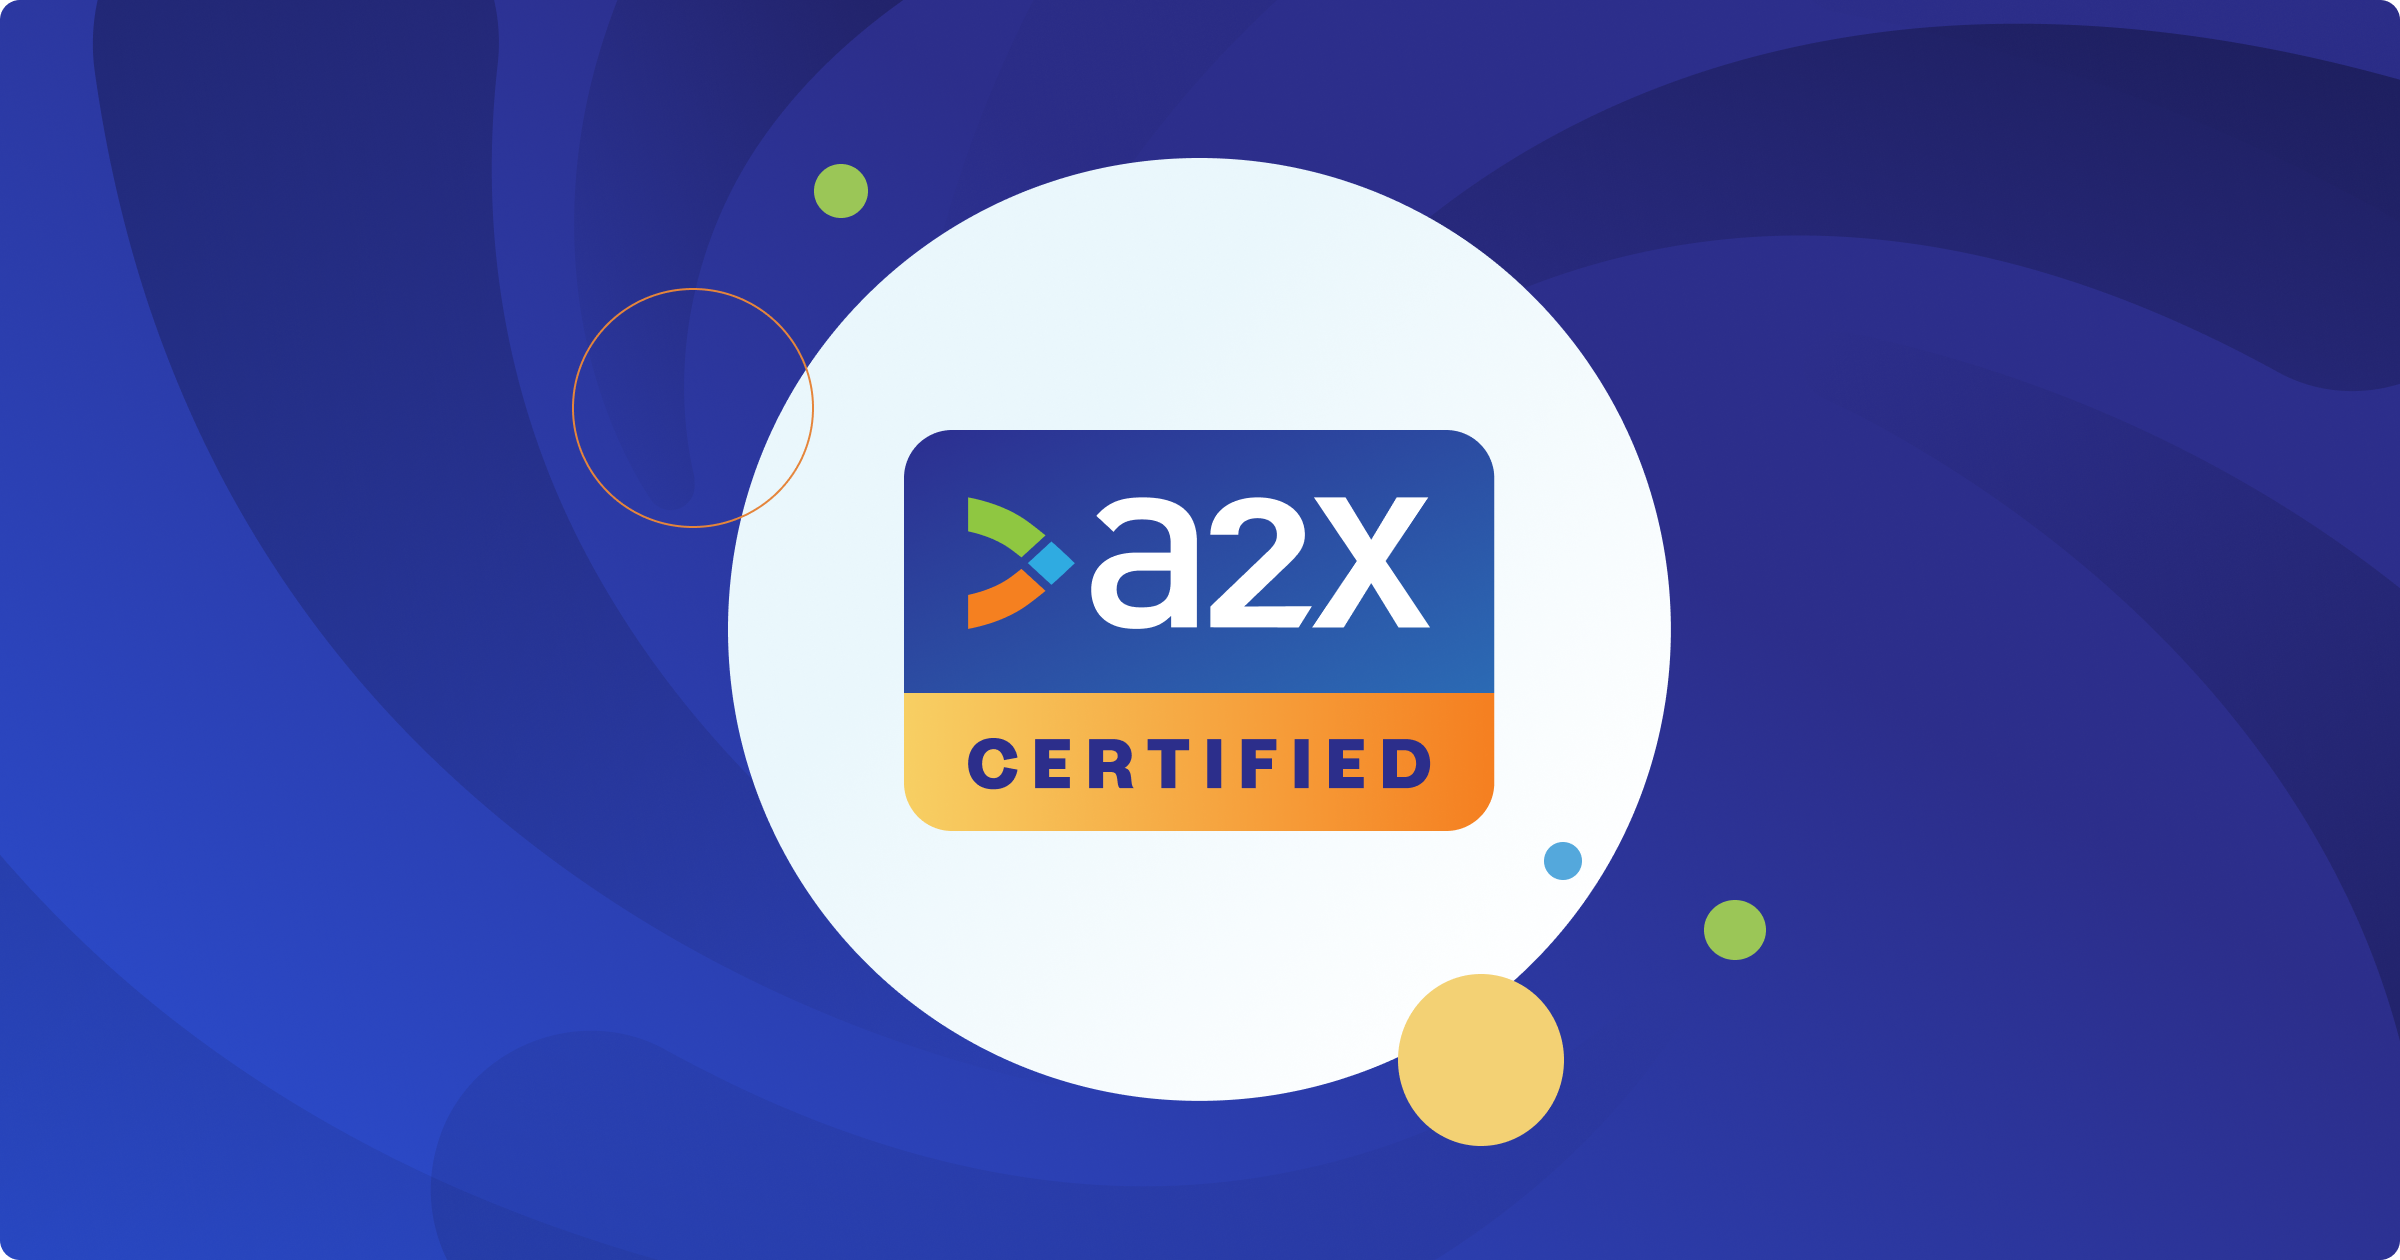 A2X Certification: How to Get Started